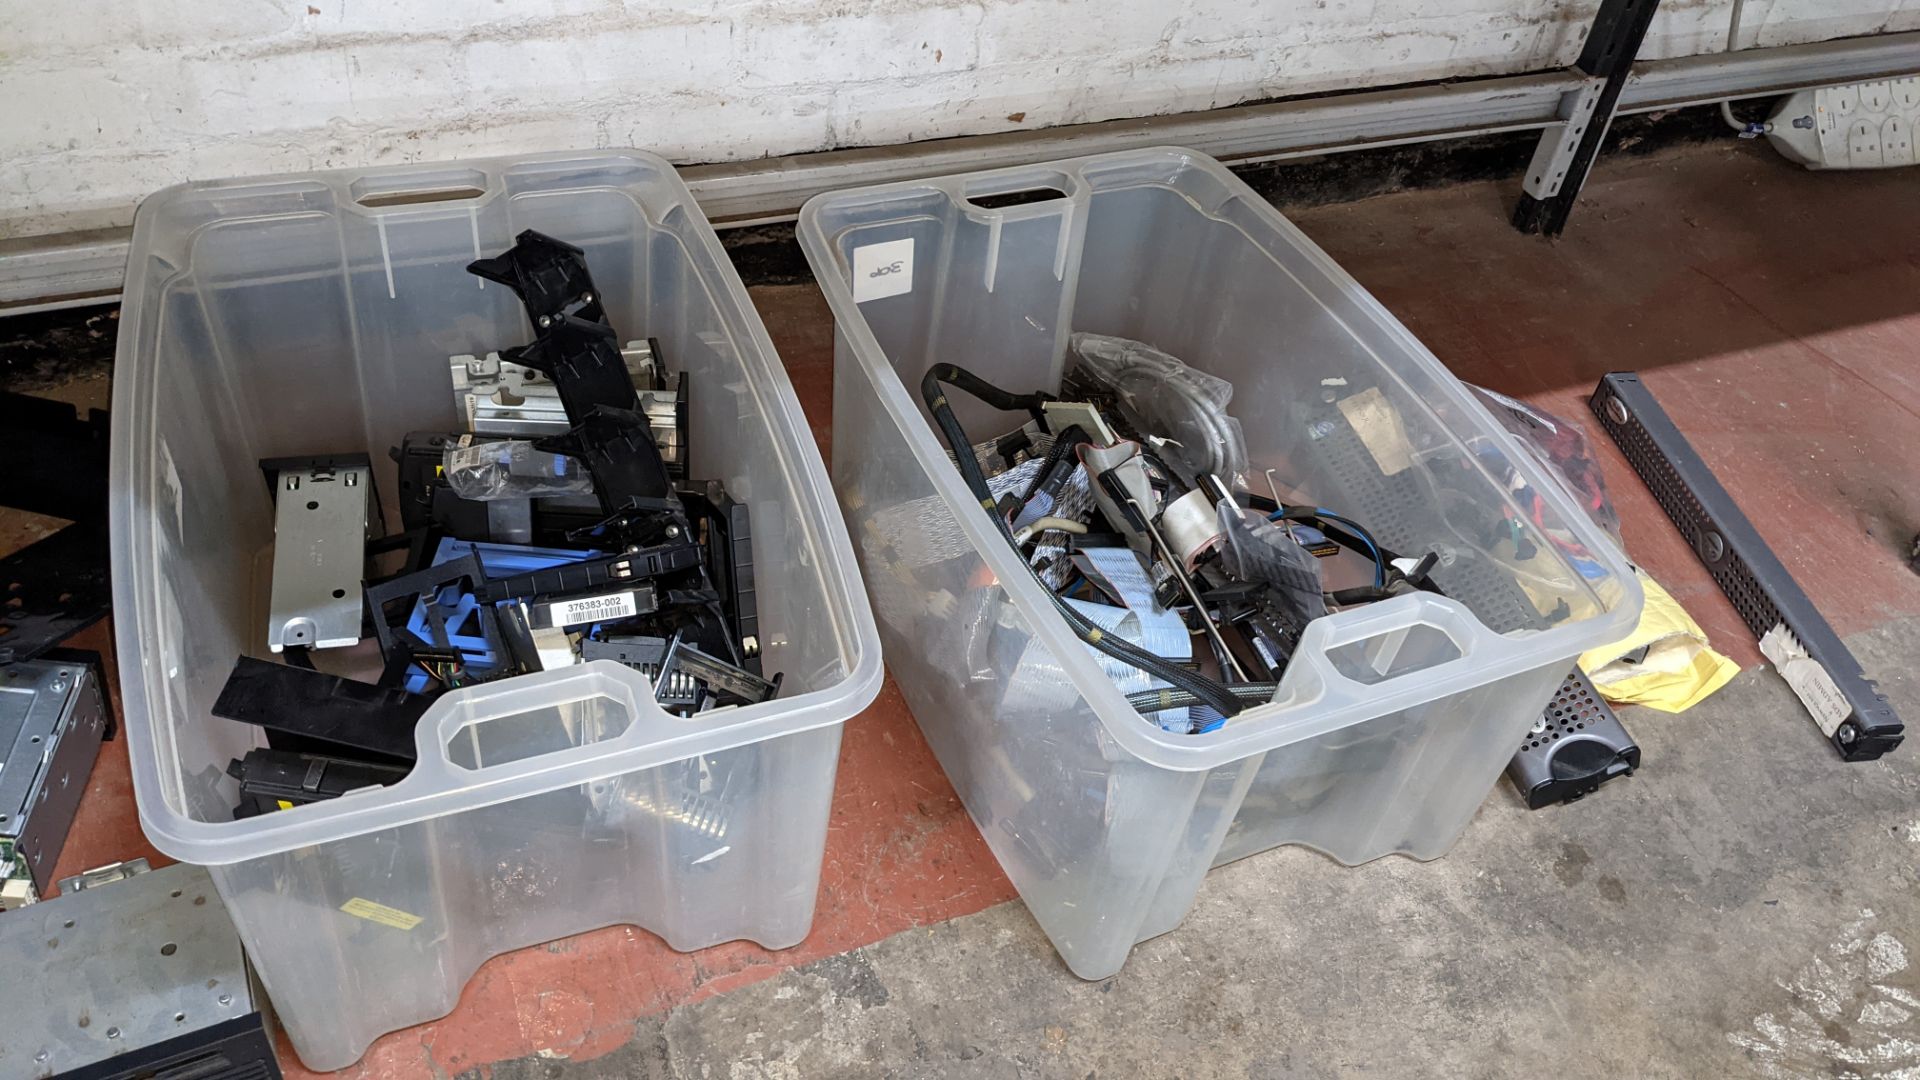 Contents of 2 crates of assorted cables & parts as pictured - crates excluded - Image 6 of 11